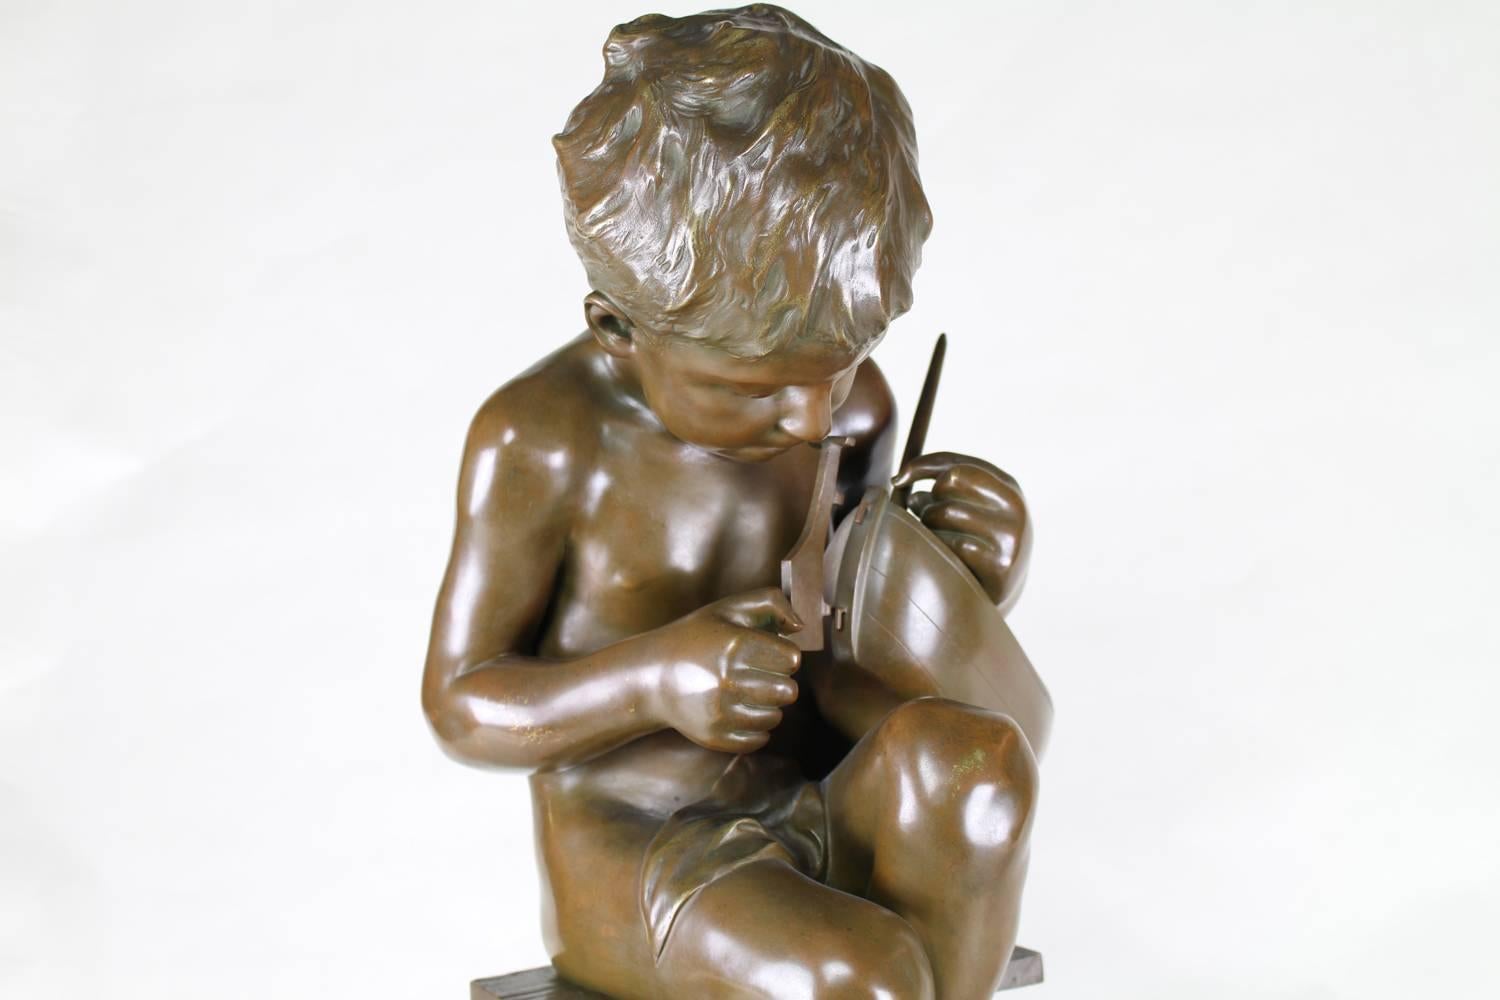 Bronze on a marble base, signed ' Villanis', titled on tag on marble base with an inscription 'prix de concours' Italian 1858-1914